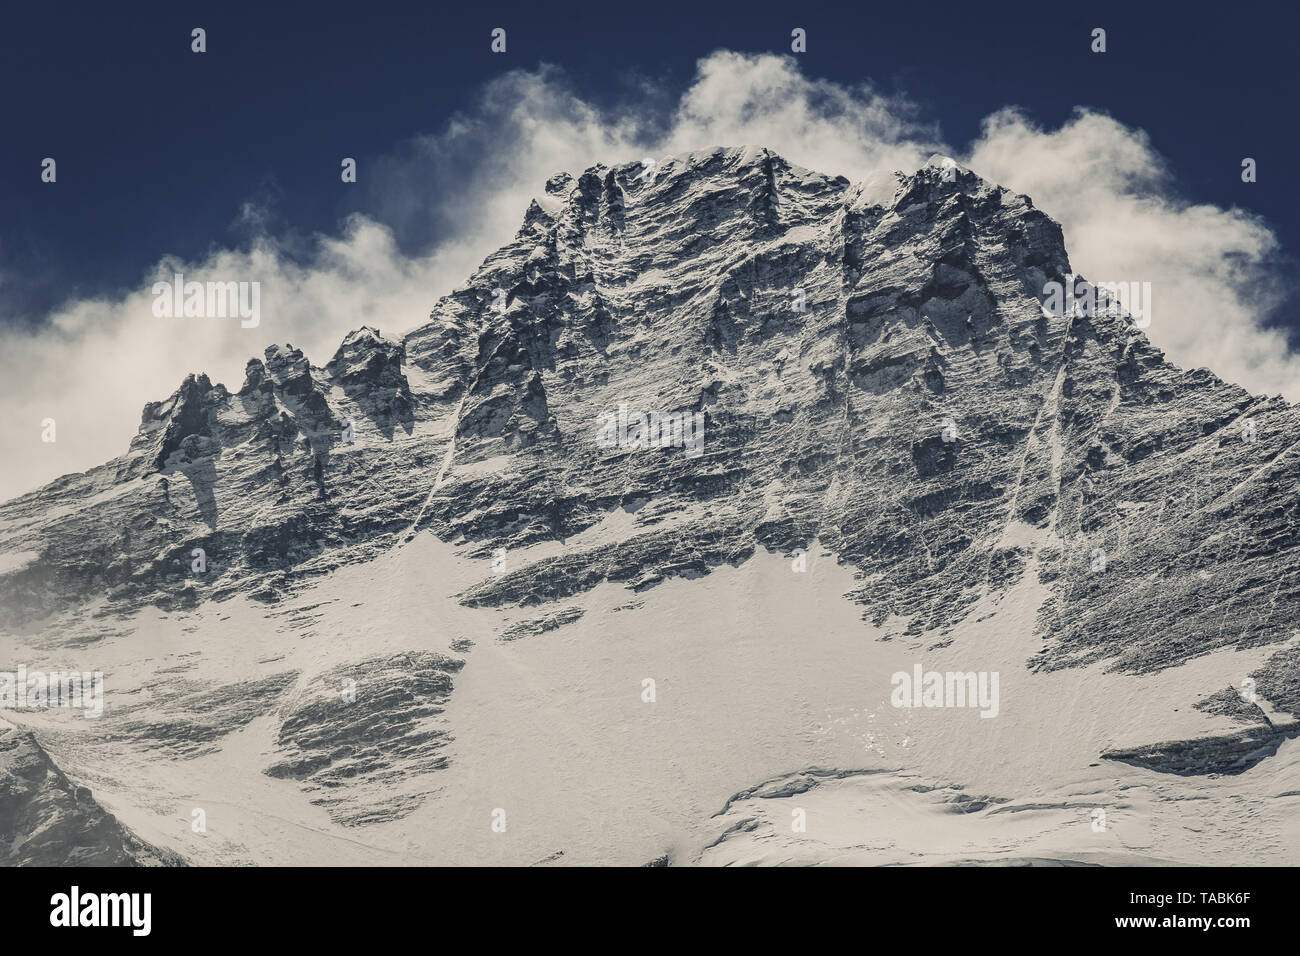 Landscape of rugged Himalayan mountain range against a deep blue sky. Stock Photo